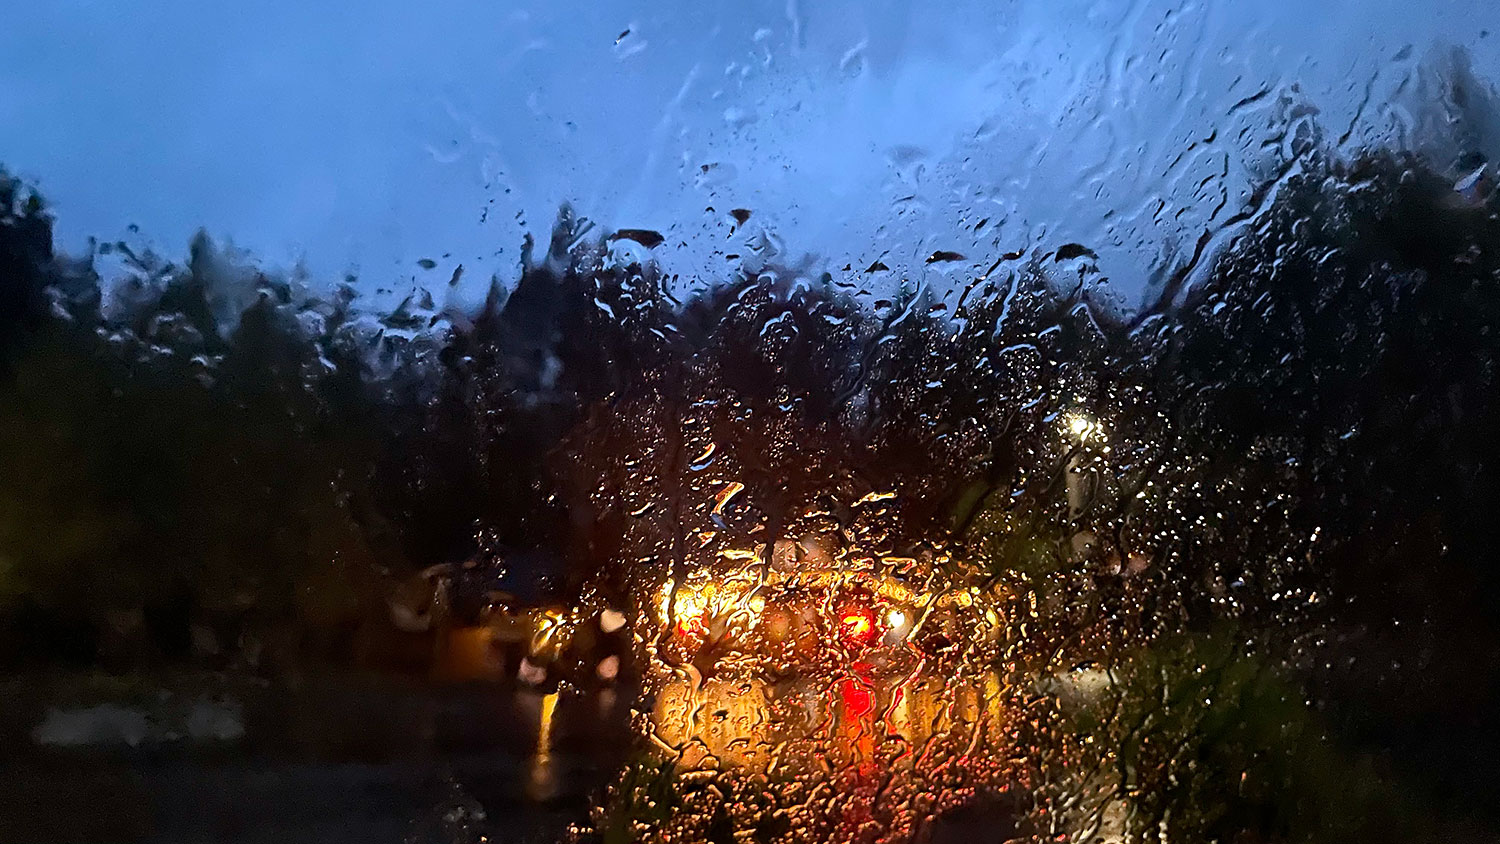 A rain-spattered windscreen in the evening, with a view of lights